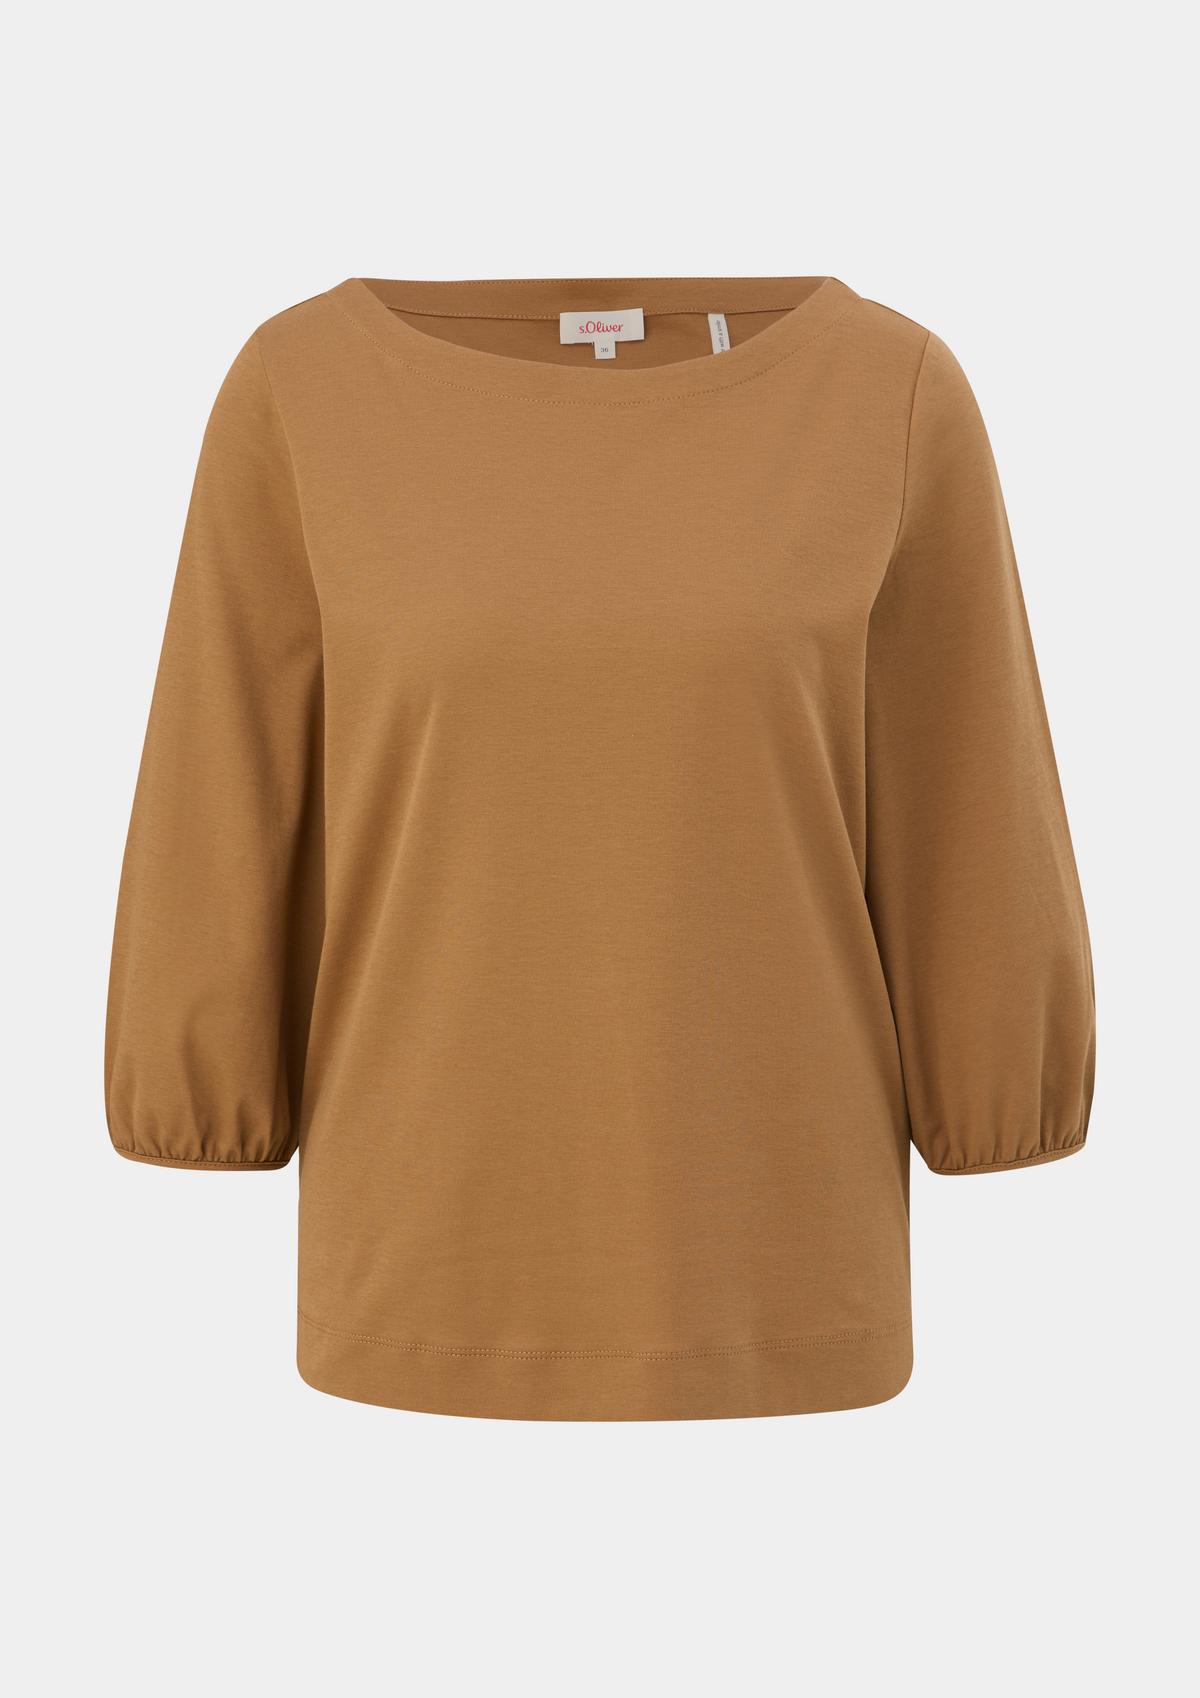 s.Oliver Blouse top with three-quarter length sleeves